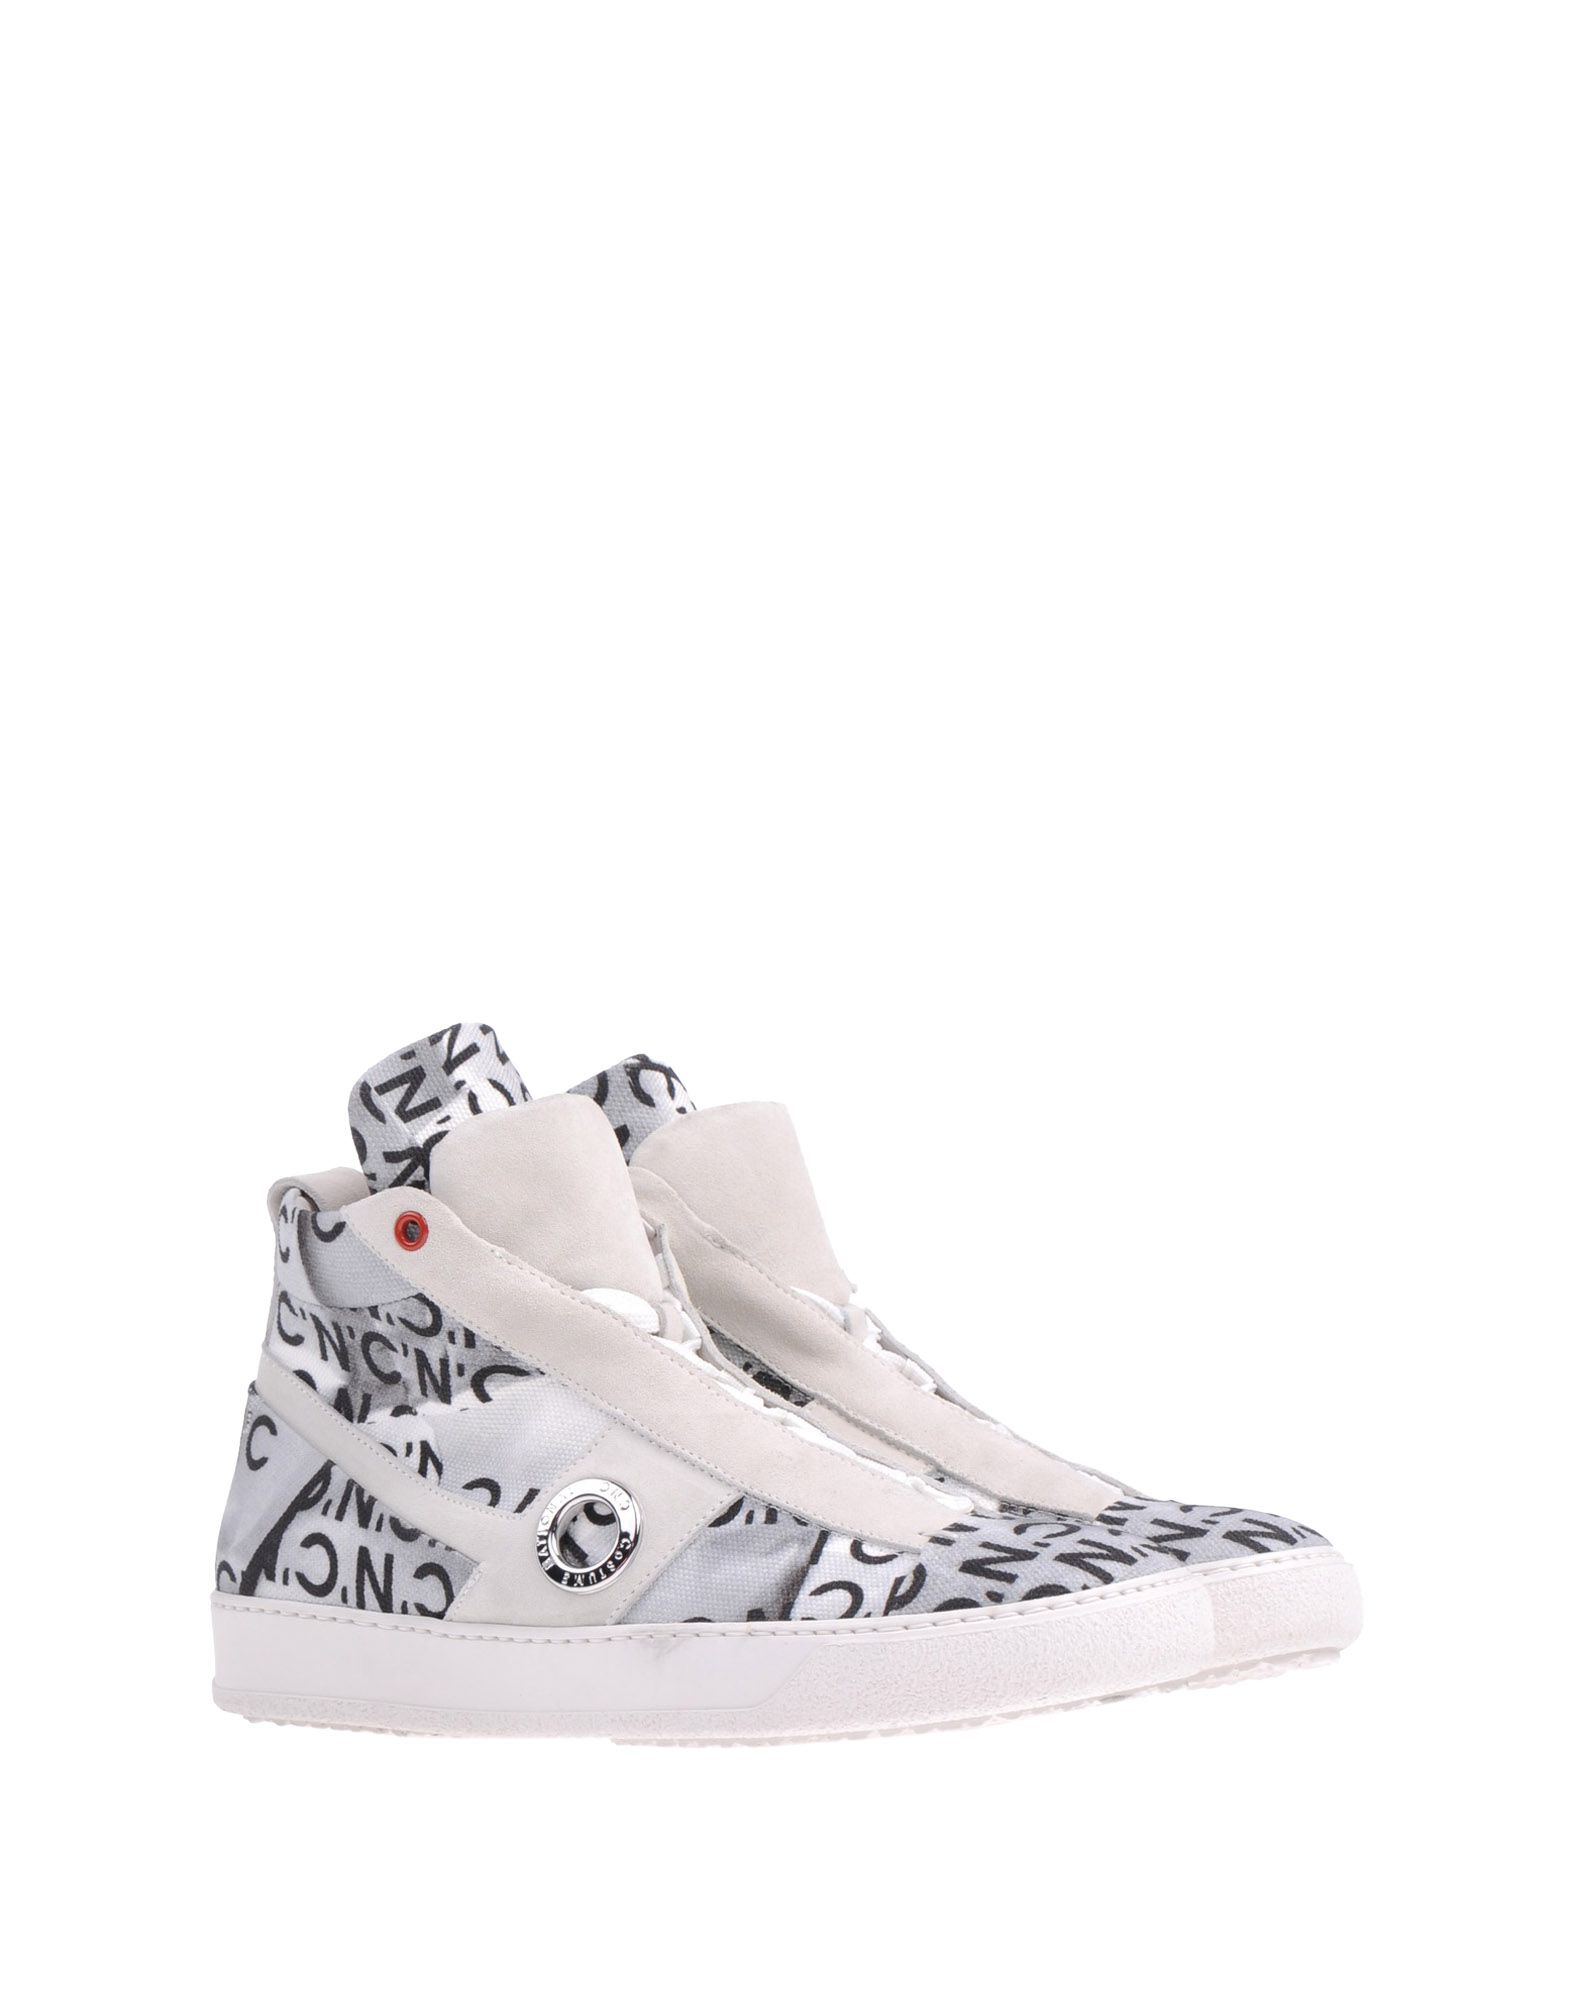 Costume national High-tops & Trainers in White | Lyst